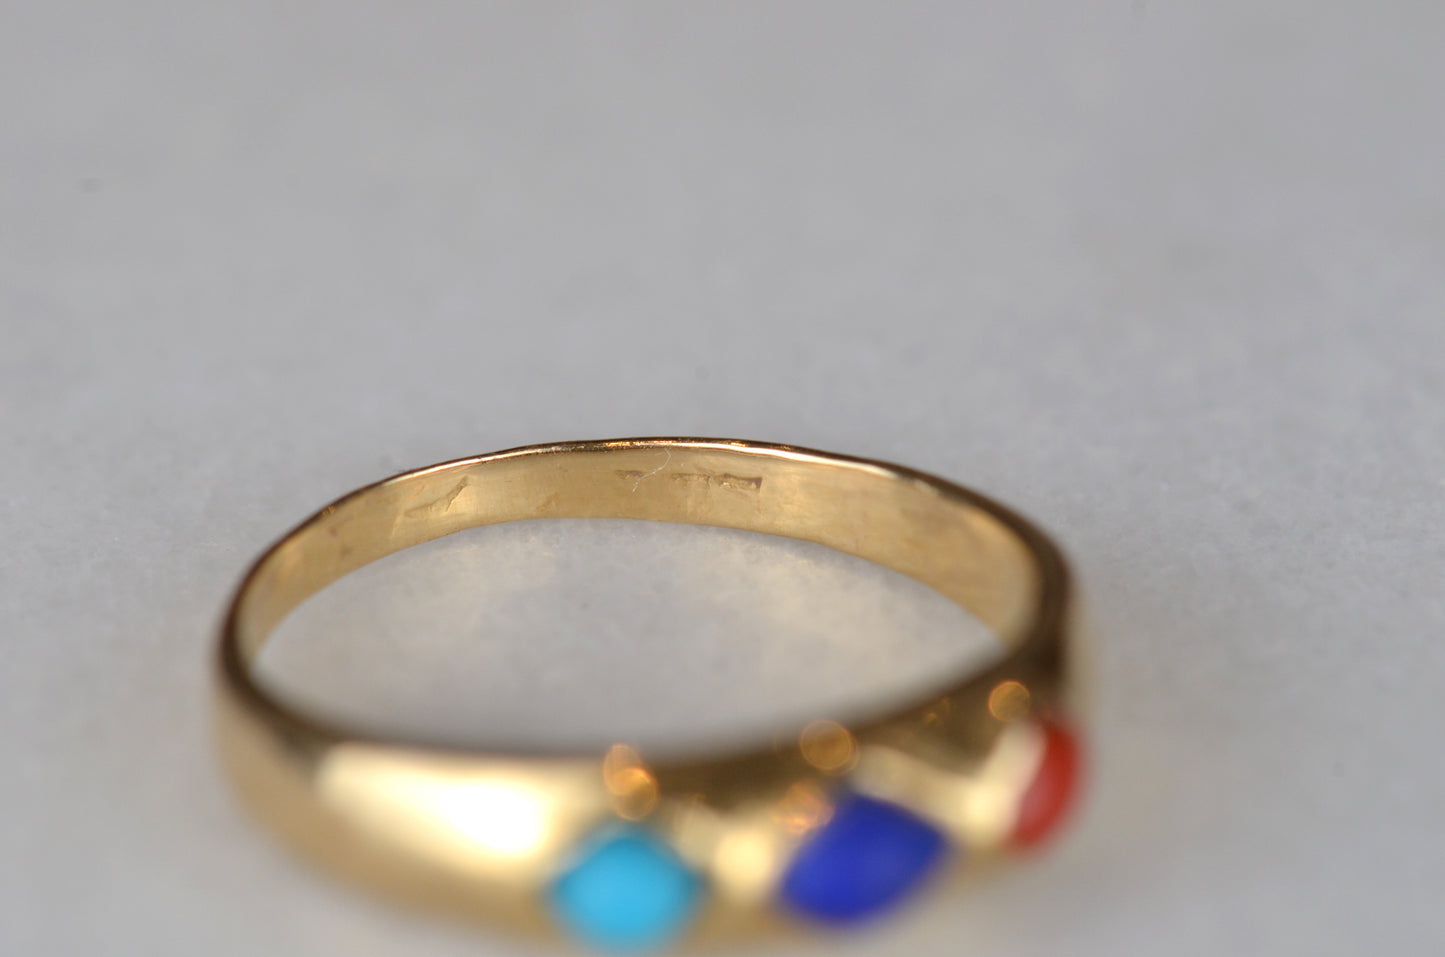 Antique-Inspired Lapis, Turquoise, and Carnelian Ring